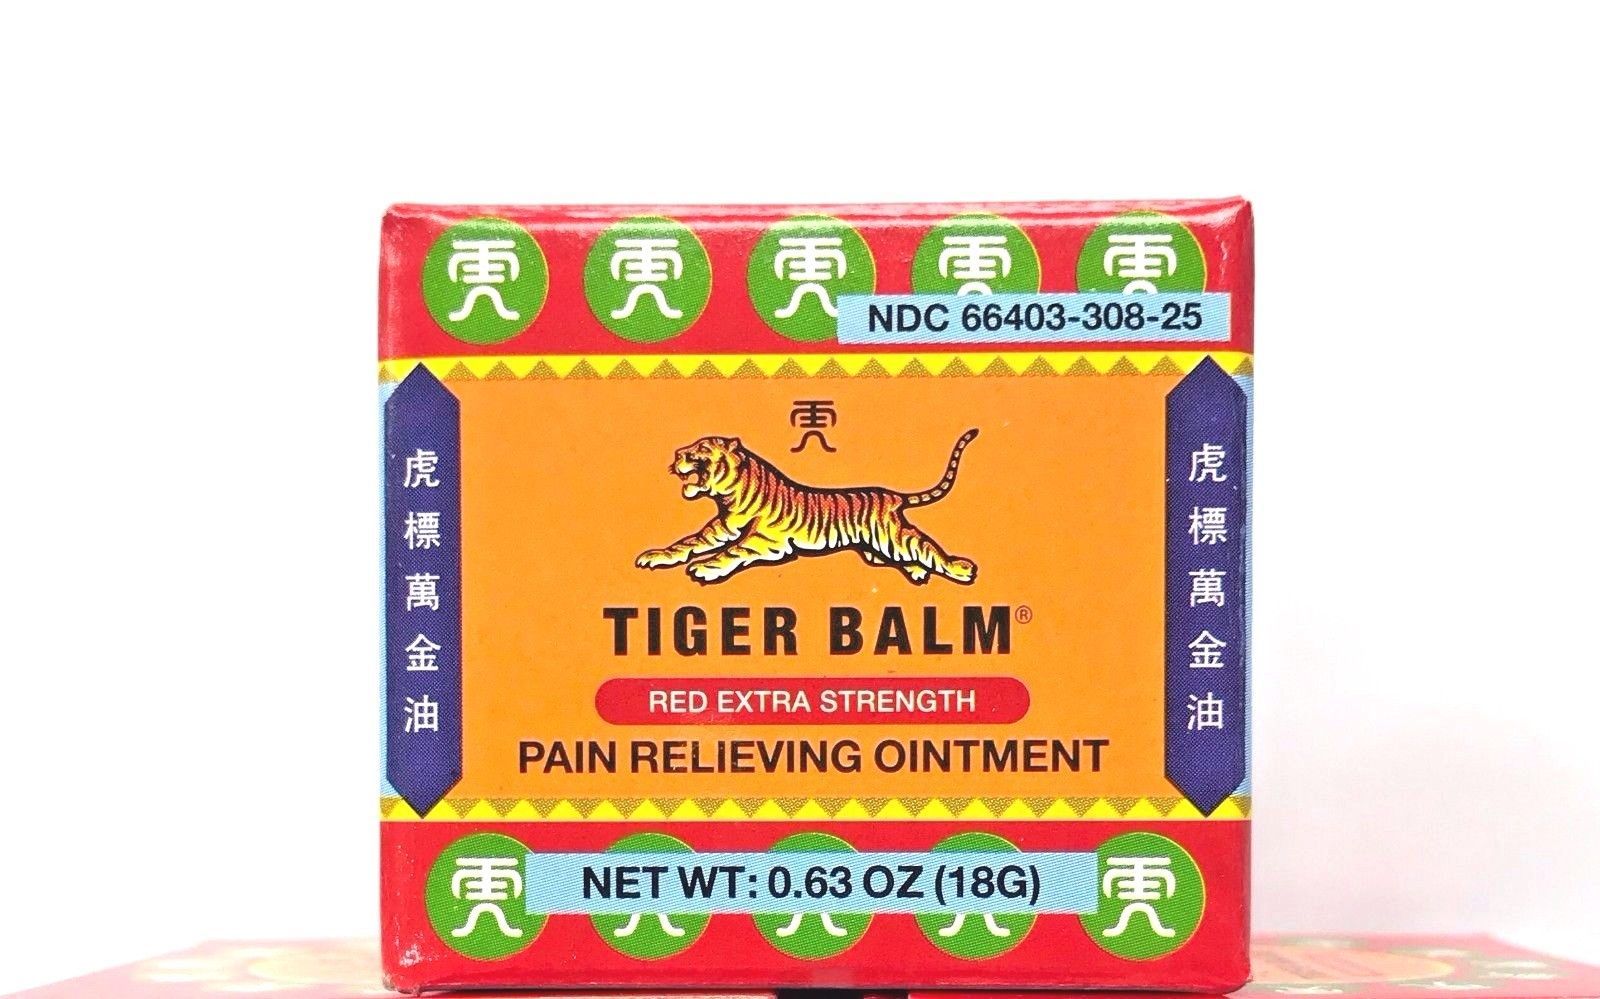 Tiger Balm Pain Relieving Ointment- Red Extra Strength 0.63 oz (18G )